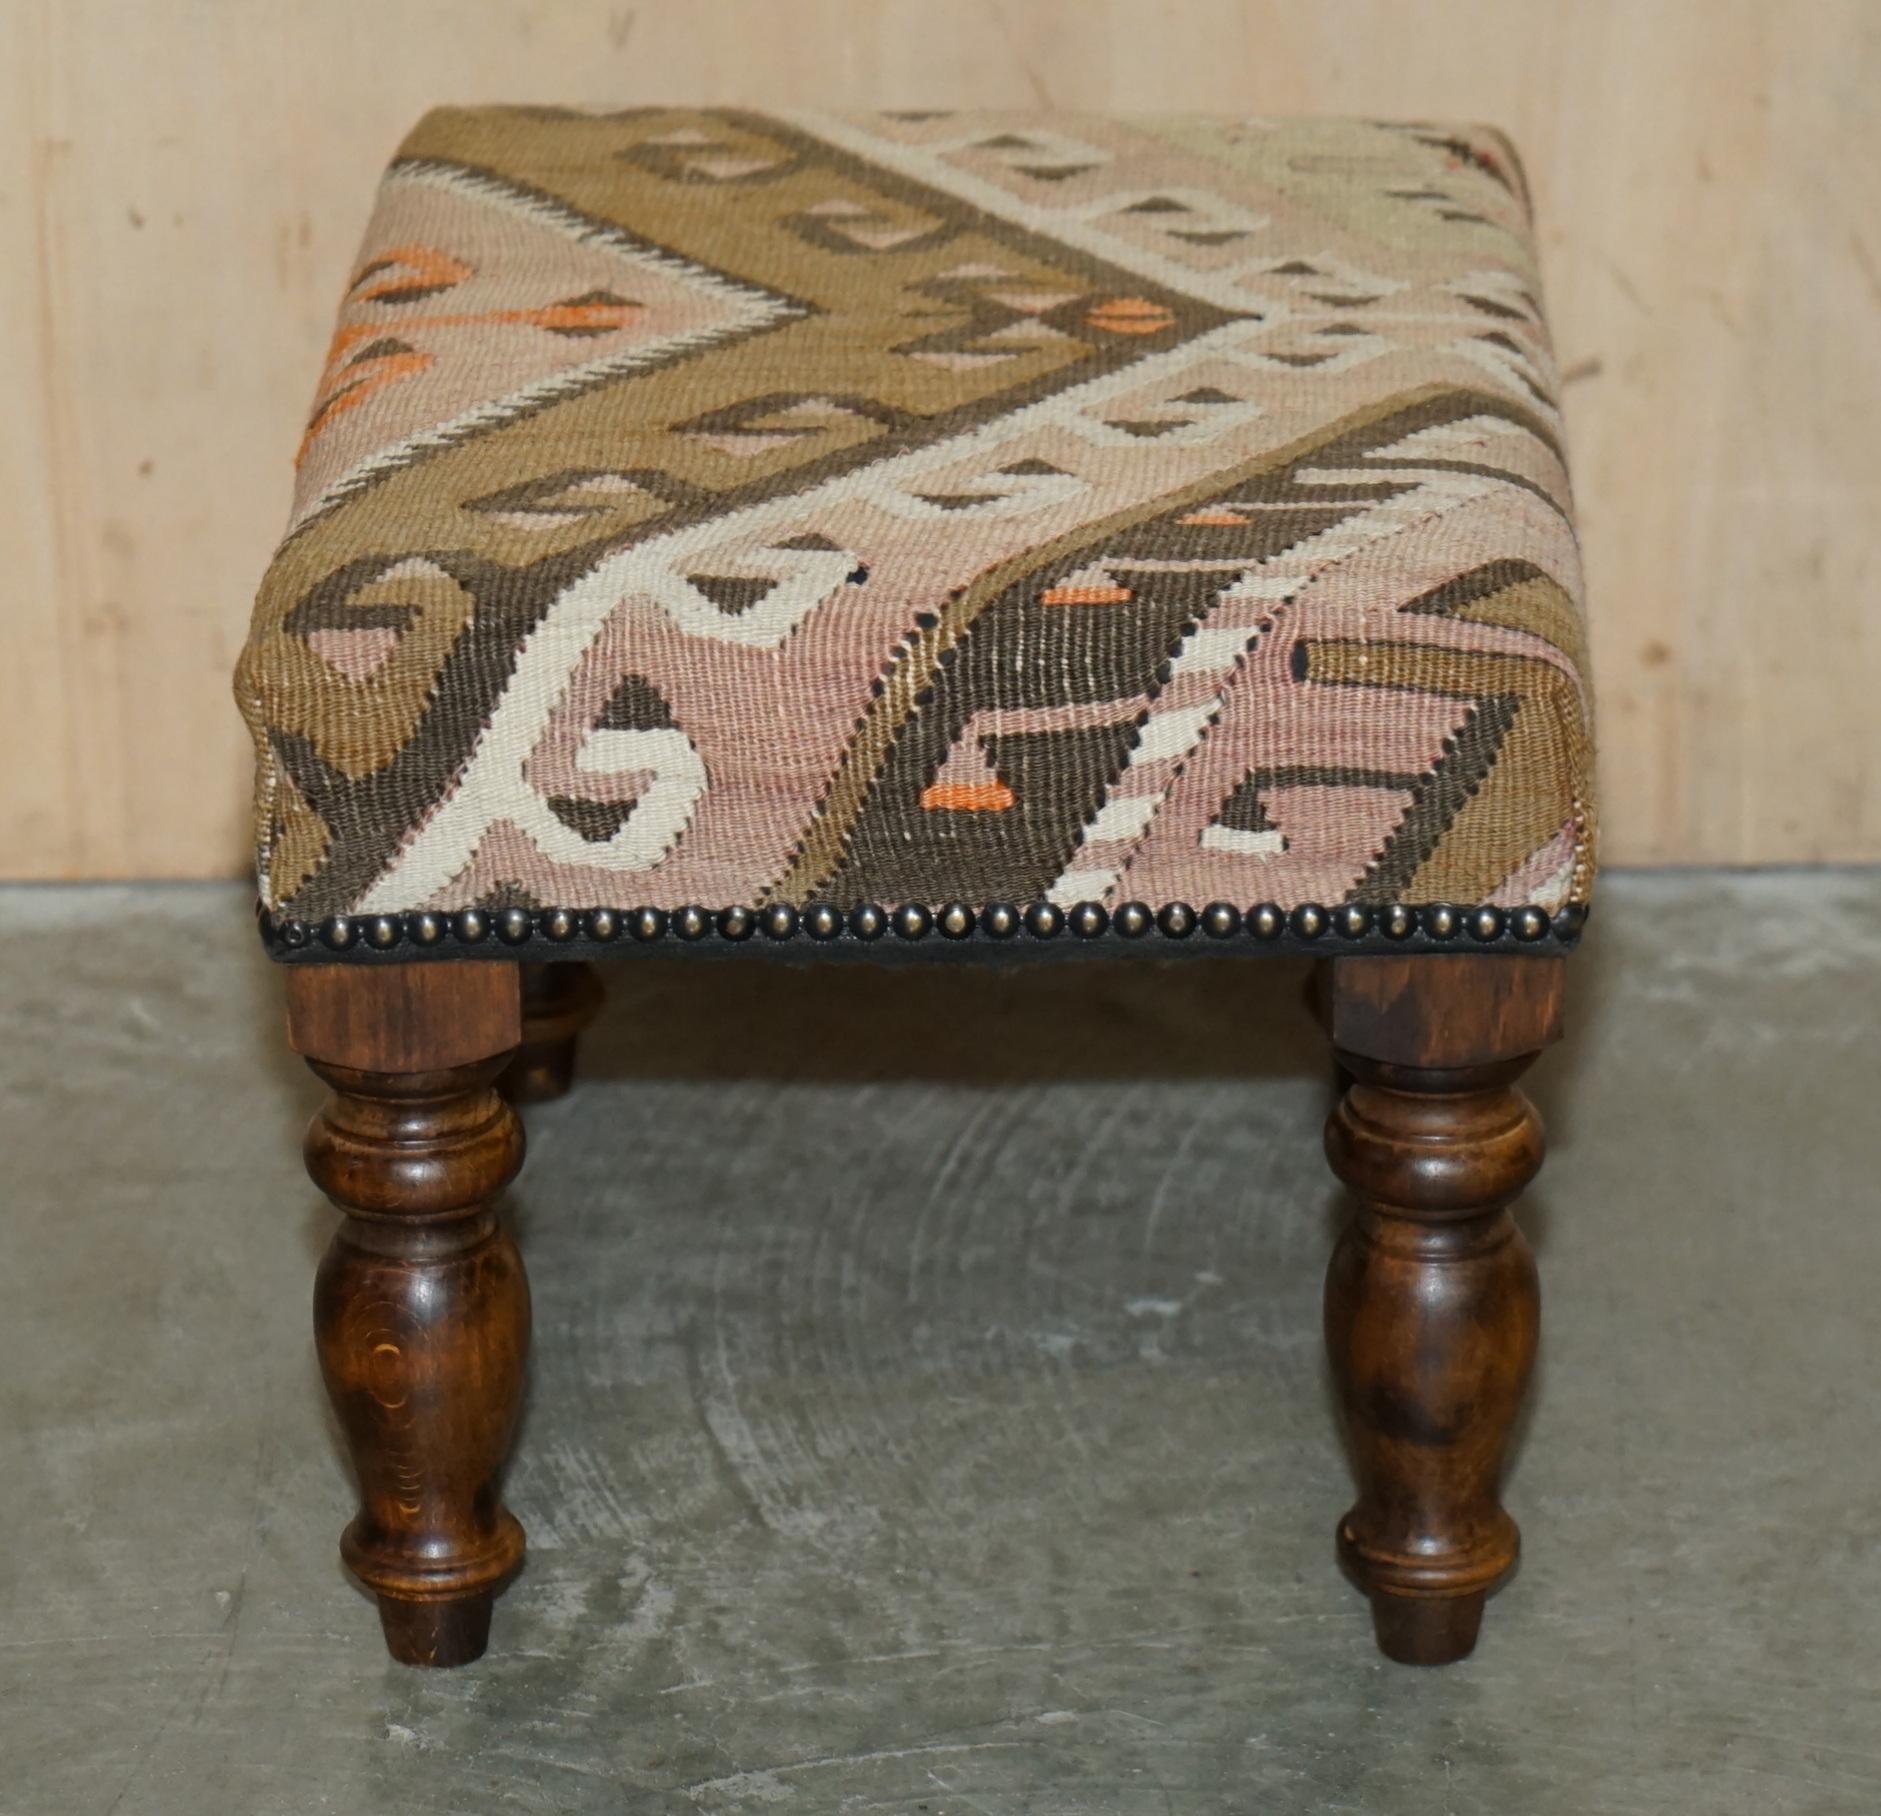 STUNNiNG & COLLECTABLE VINTAGE GEORGE SMITH CHELSEA KILIM FOOTSTOOL OTTOMAN For Sale 2